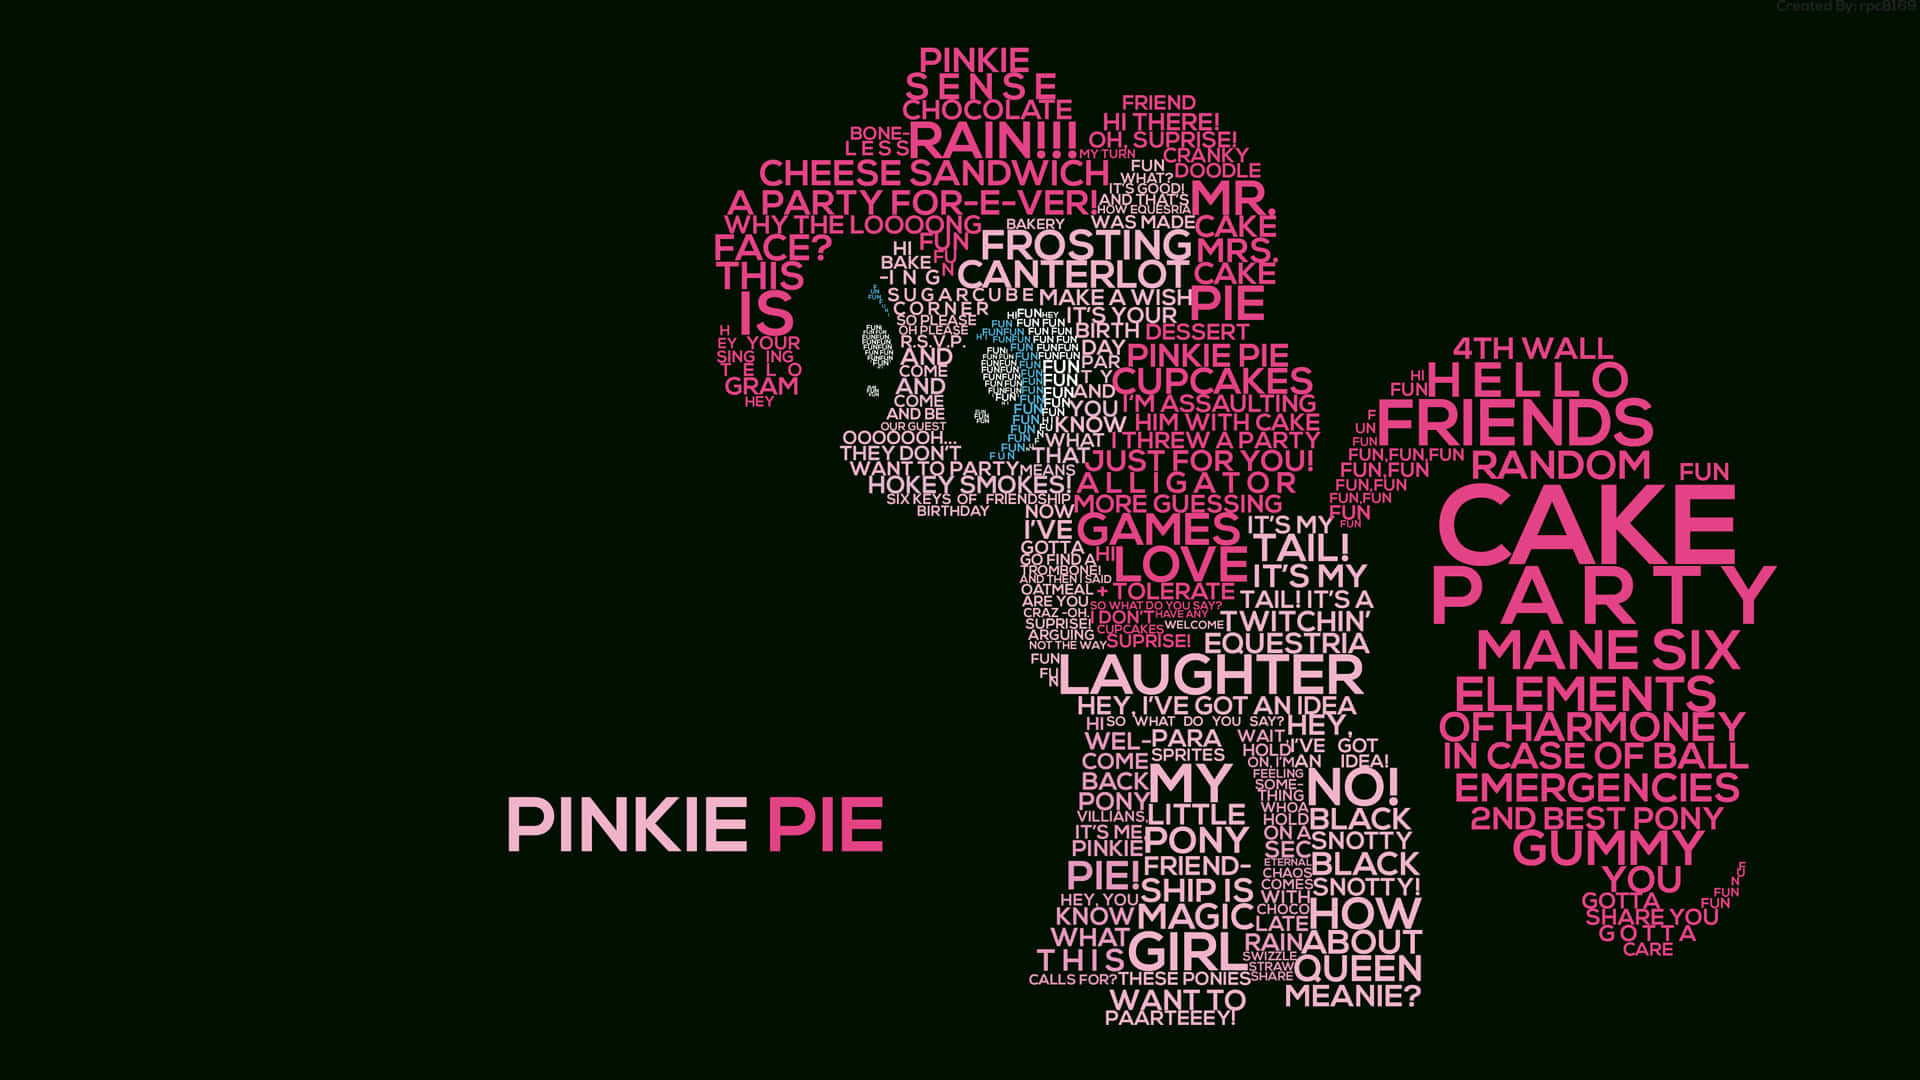 Pinkie Pie gives a cheerful jump and smile in her bright pink hair and purple hair bow.